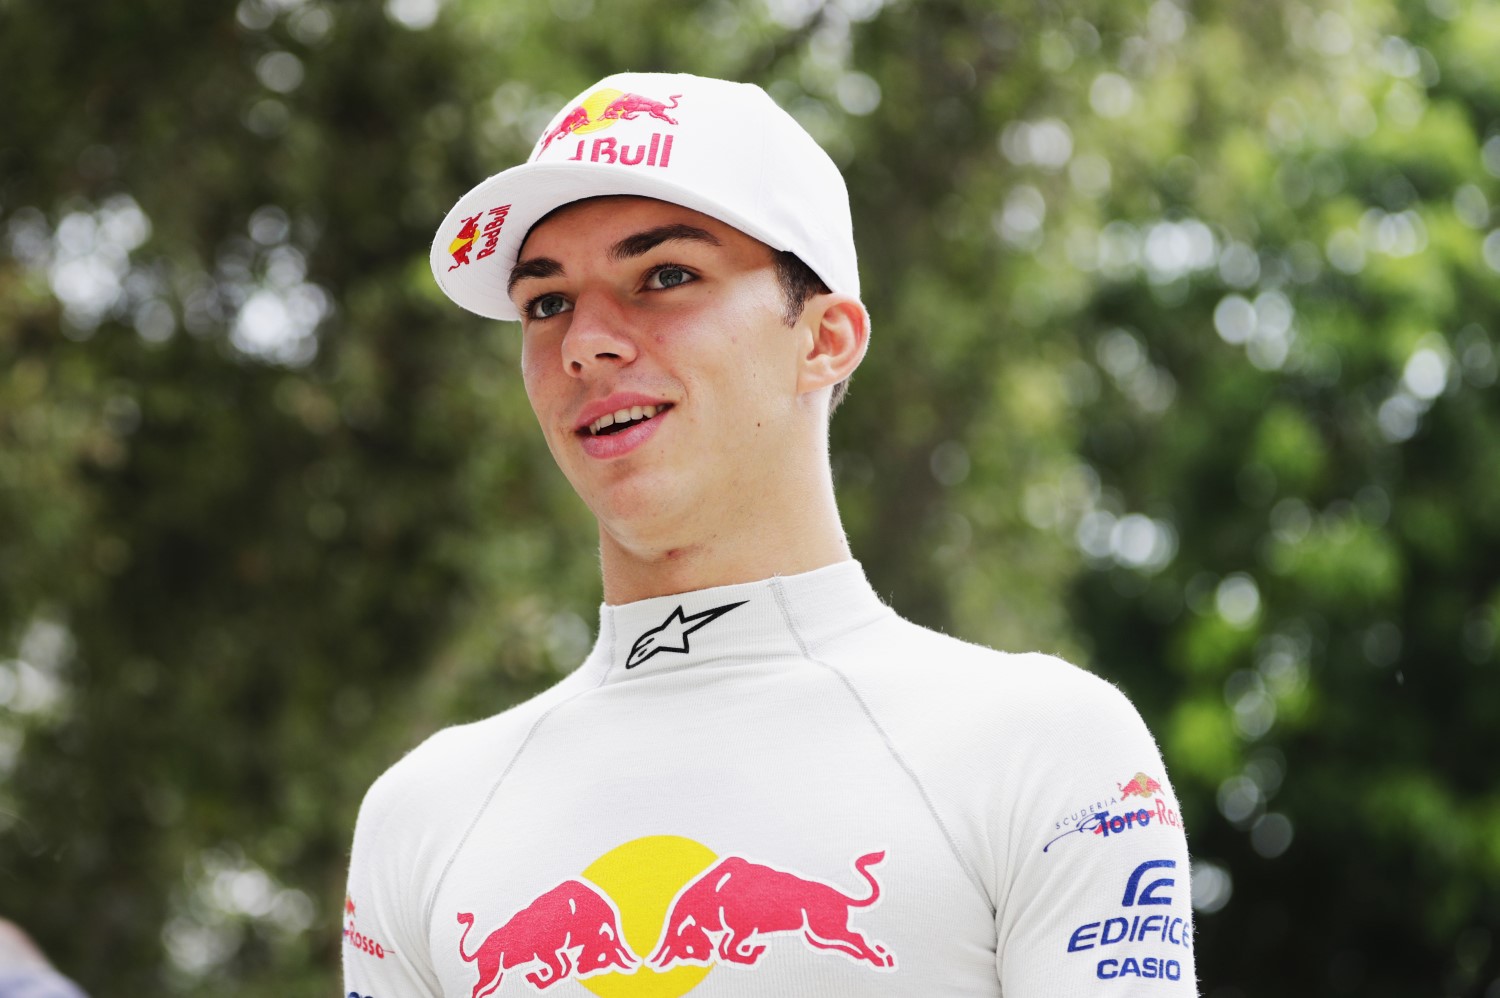 Gasly thrilled to be in F1